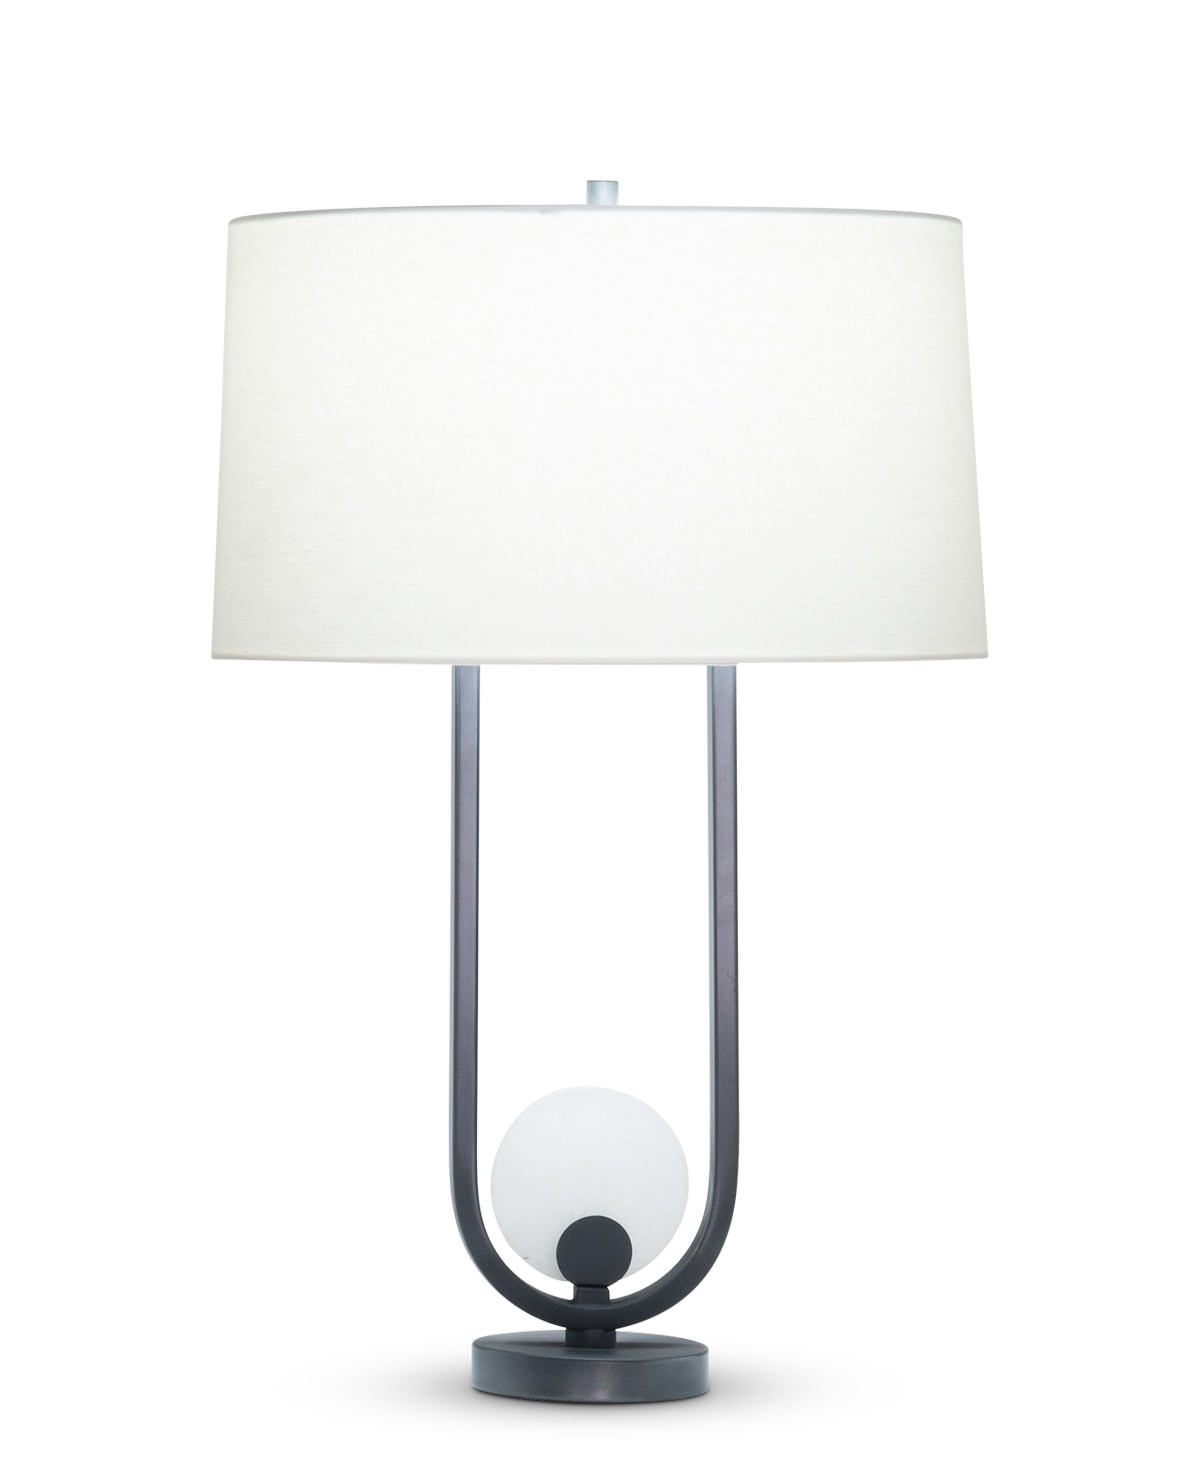 FlowDecor Archie Table Lamp in metal with gunmetal finish and alabaster and off-white linen oval shade (# 4516)